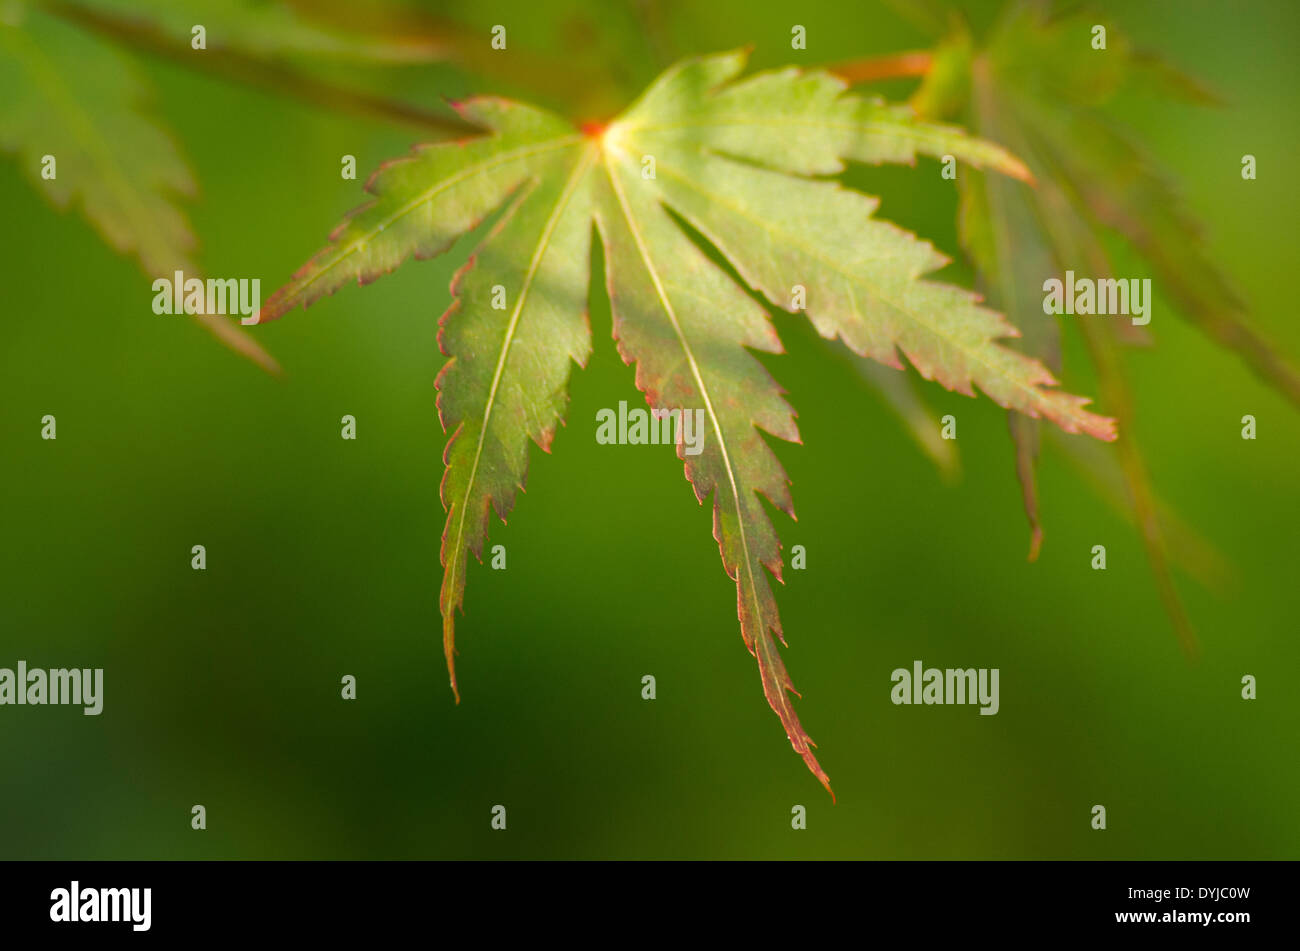 Acer leaf, isolated against the background with tight depth of field. Acer palmatum. Stock Photo